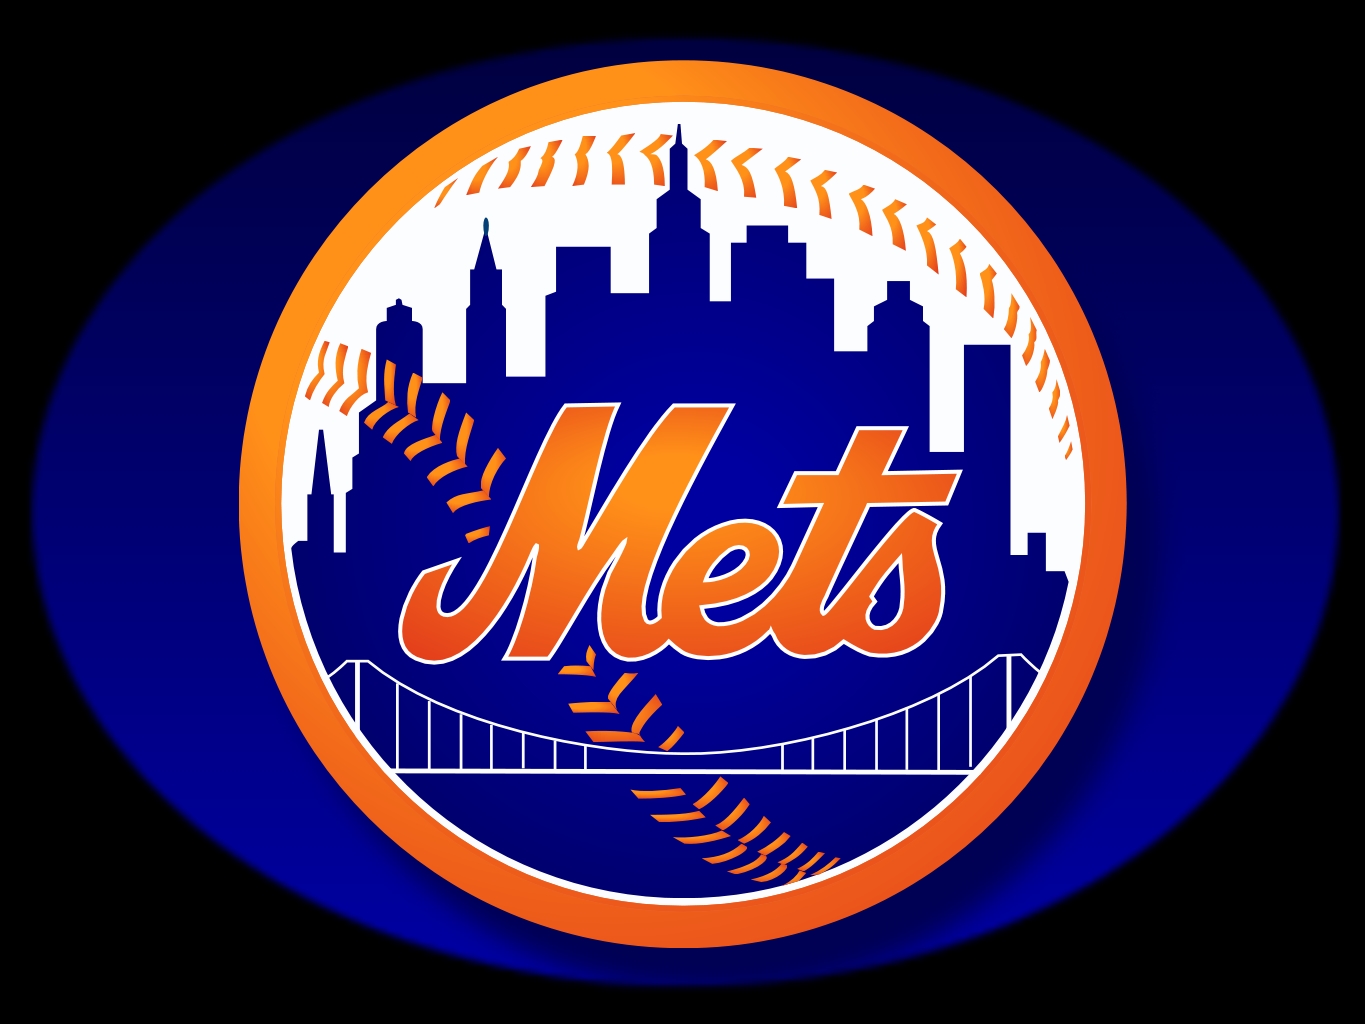 New York Mets wallpapers New York Mets background Page 2 1365x1024.